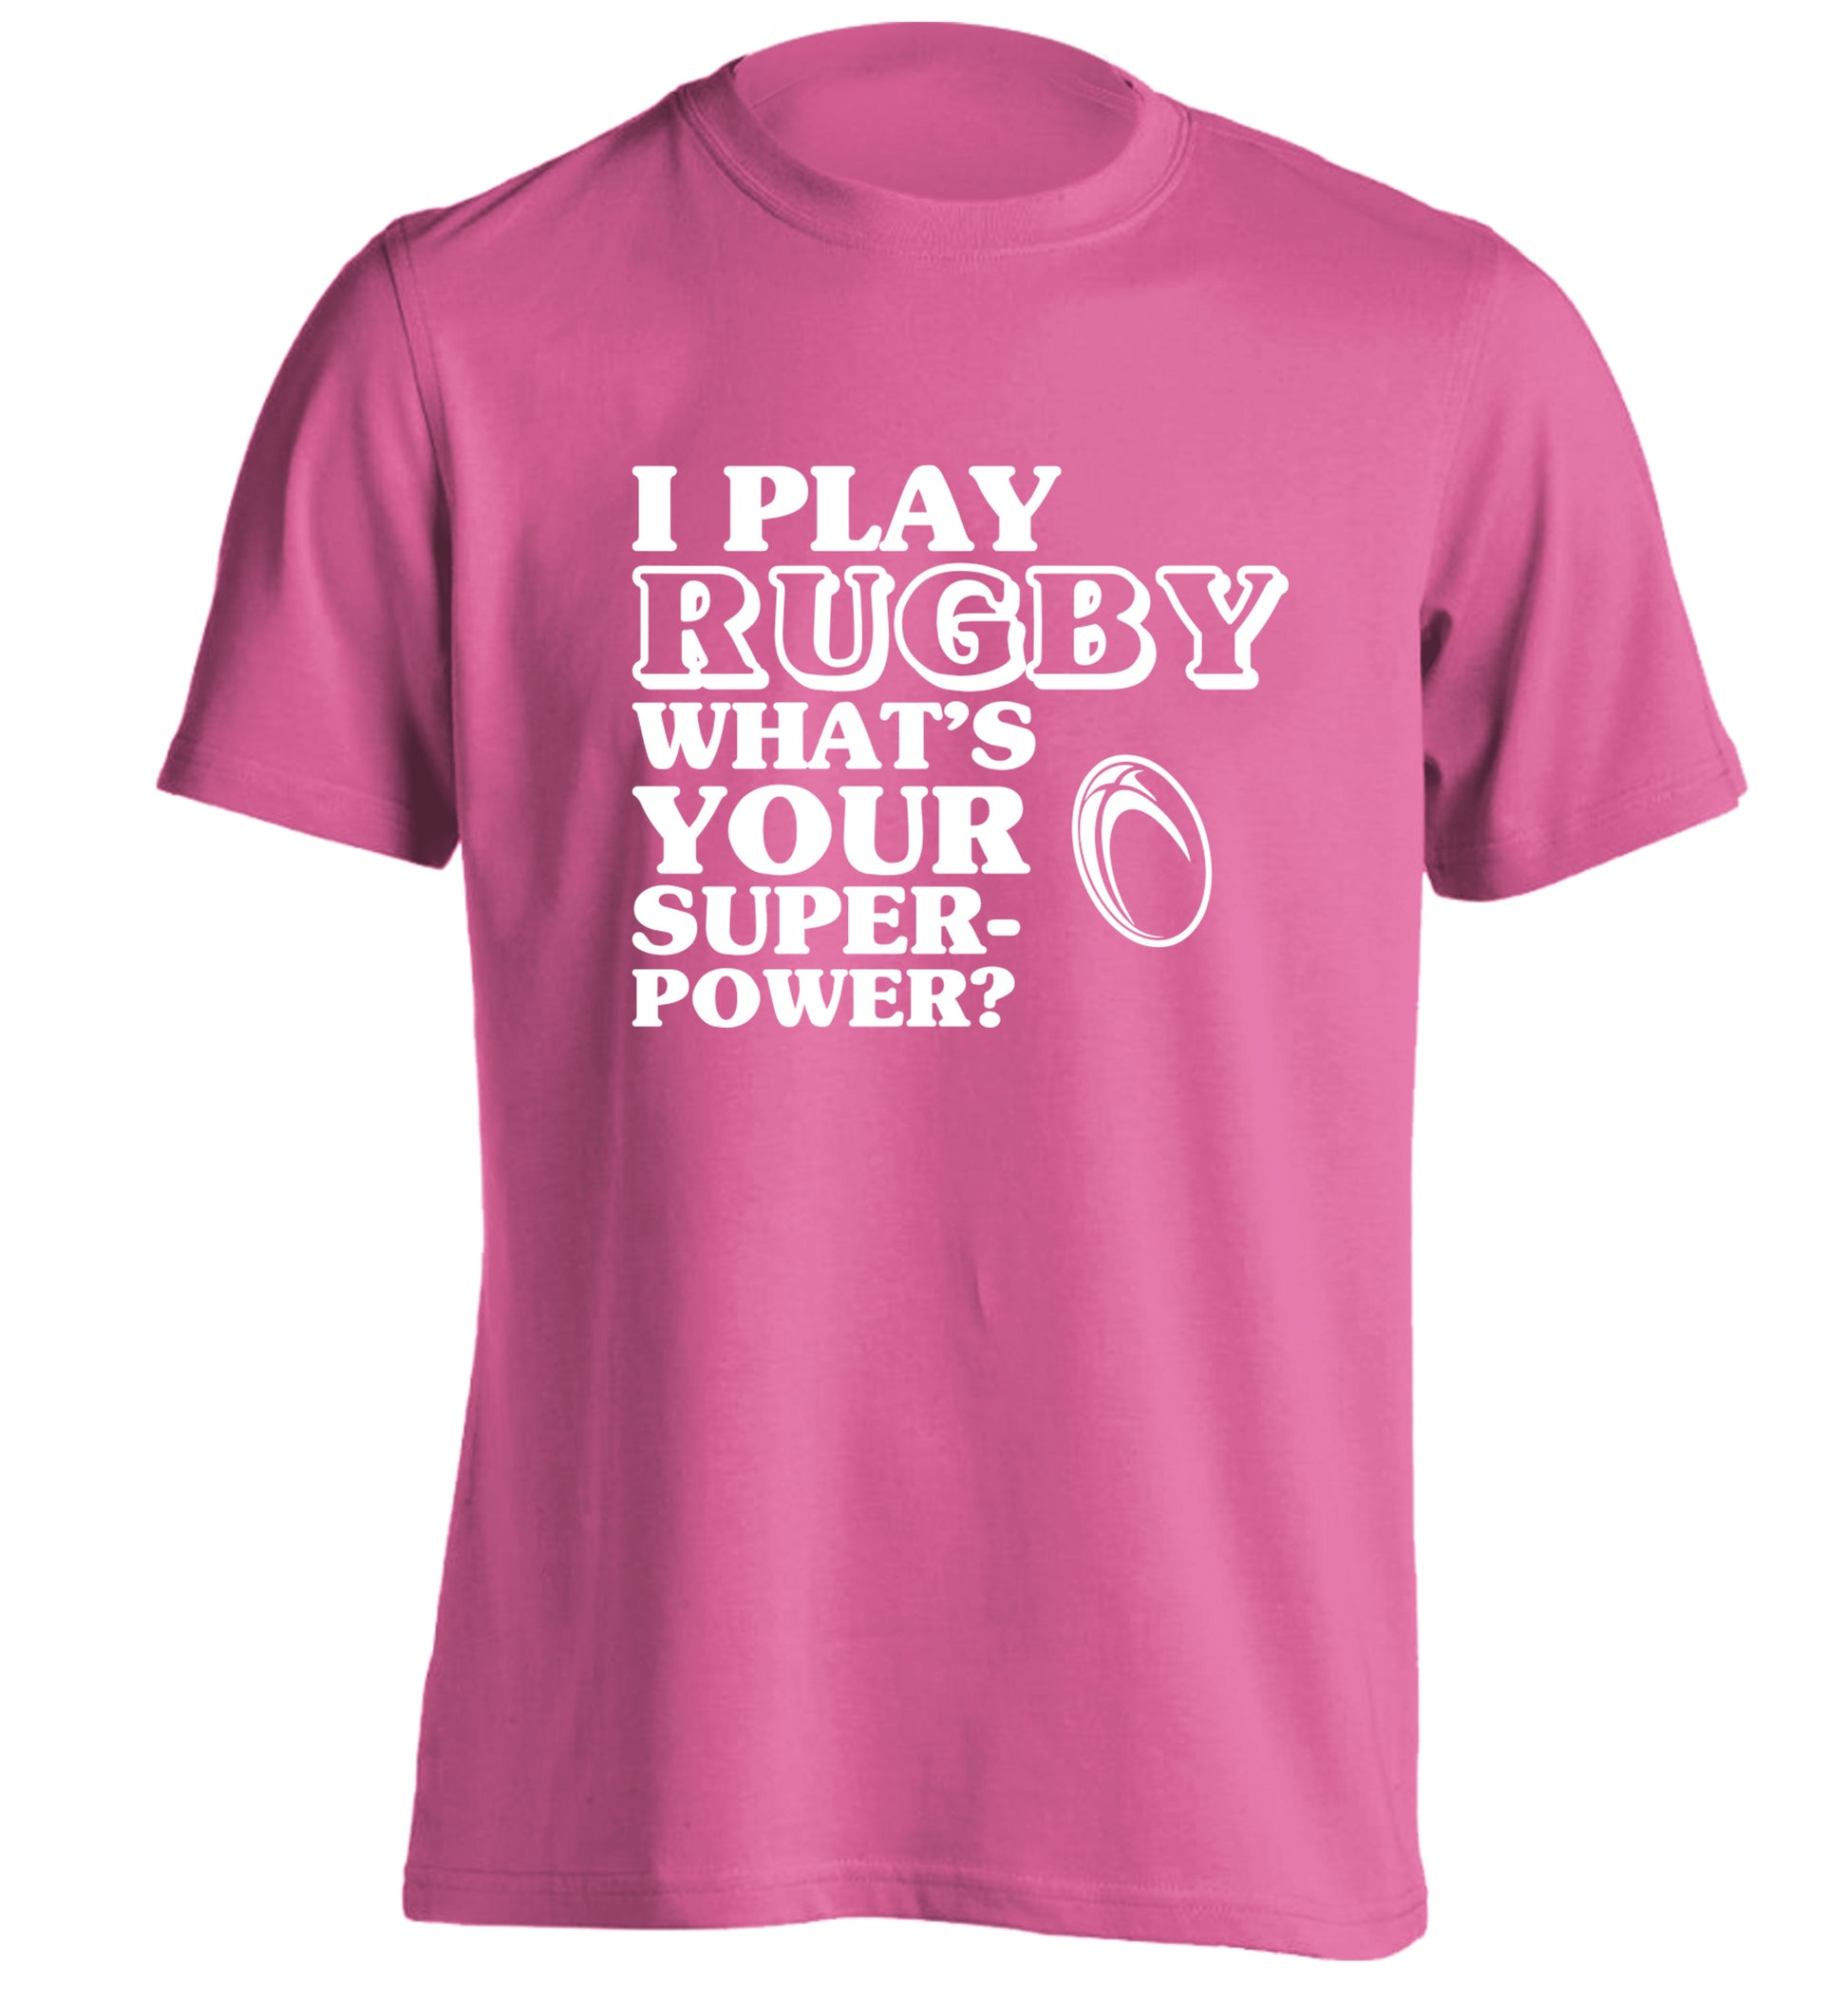 I play rugby what's your superpower? adults unisex pink Tshirt 2XL